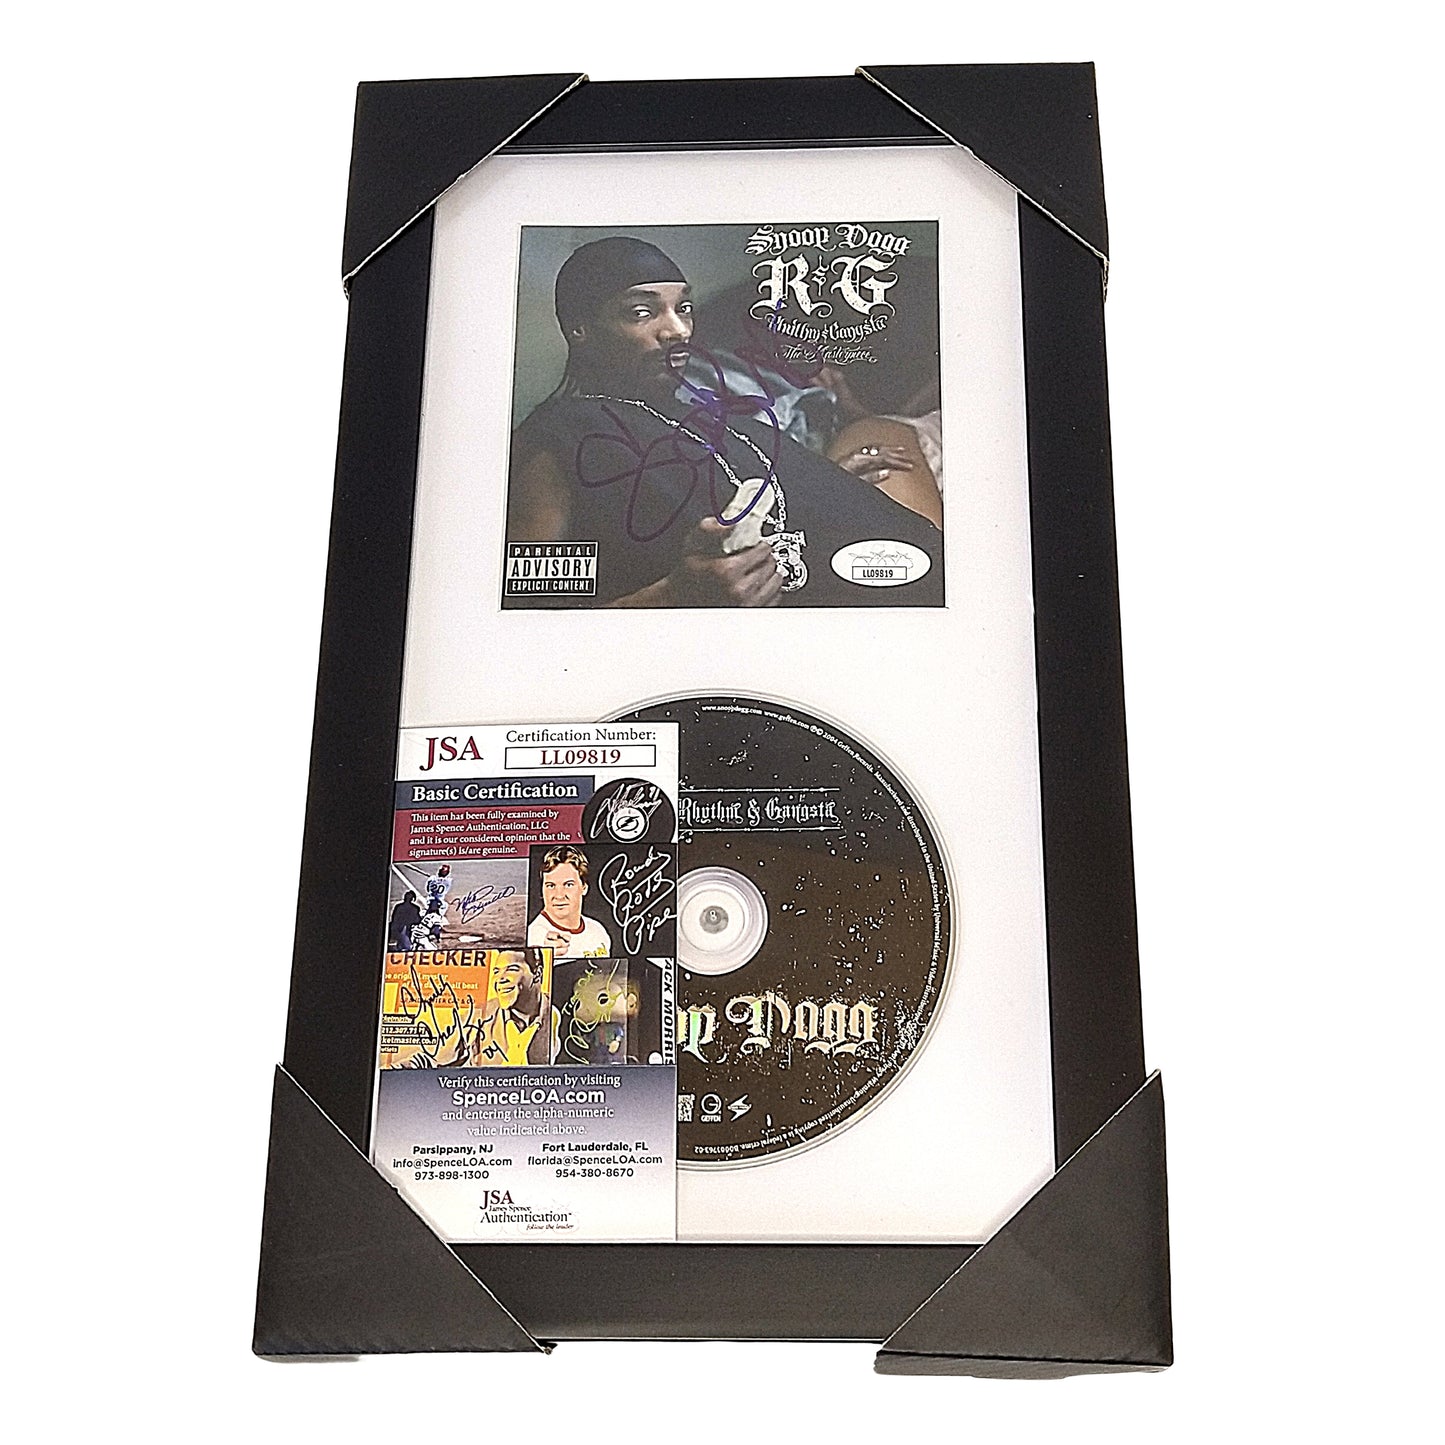 Music- Autographed- Snoop Dogg Signed Rhythm and Gangsta Framed Compact Disc Cover Booklet with CD- JSA Authentication 101